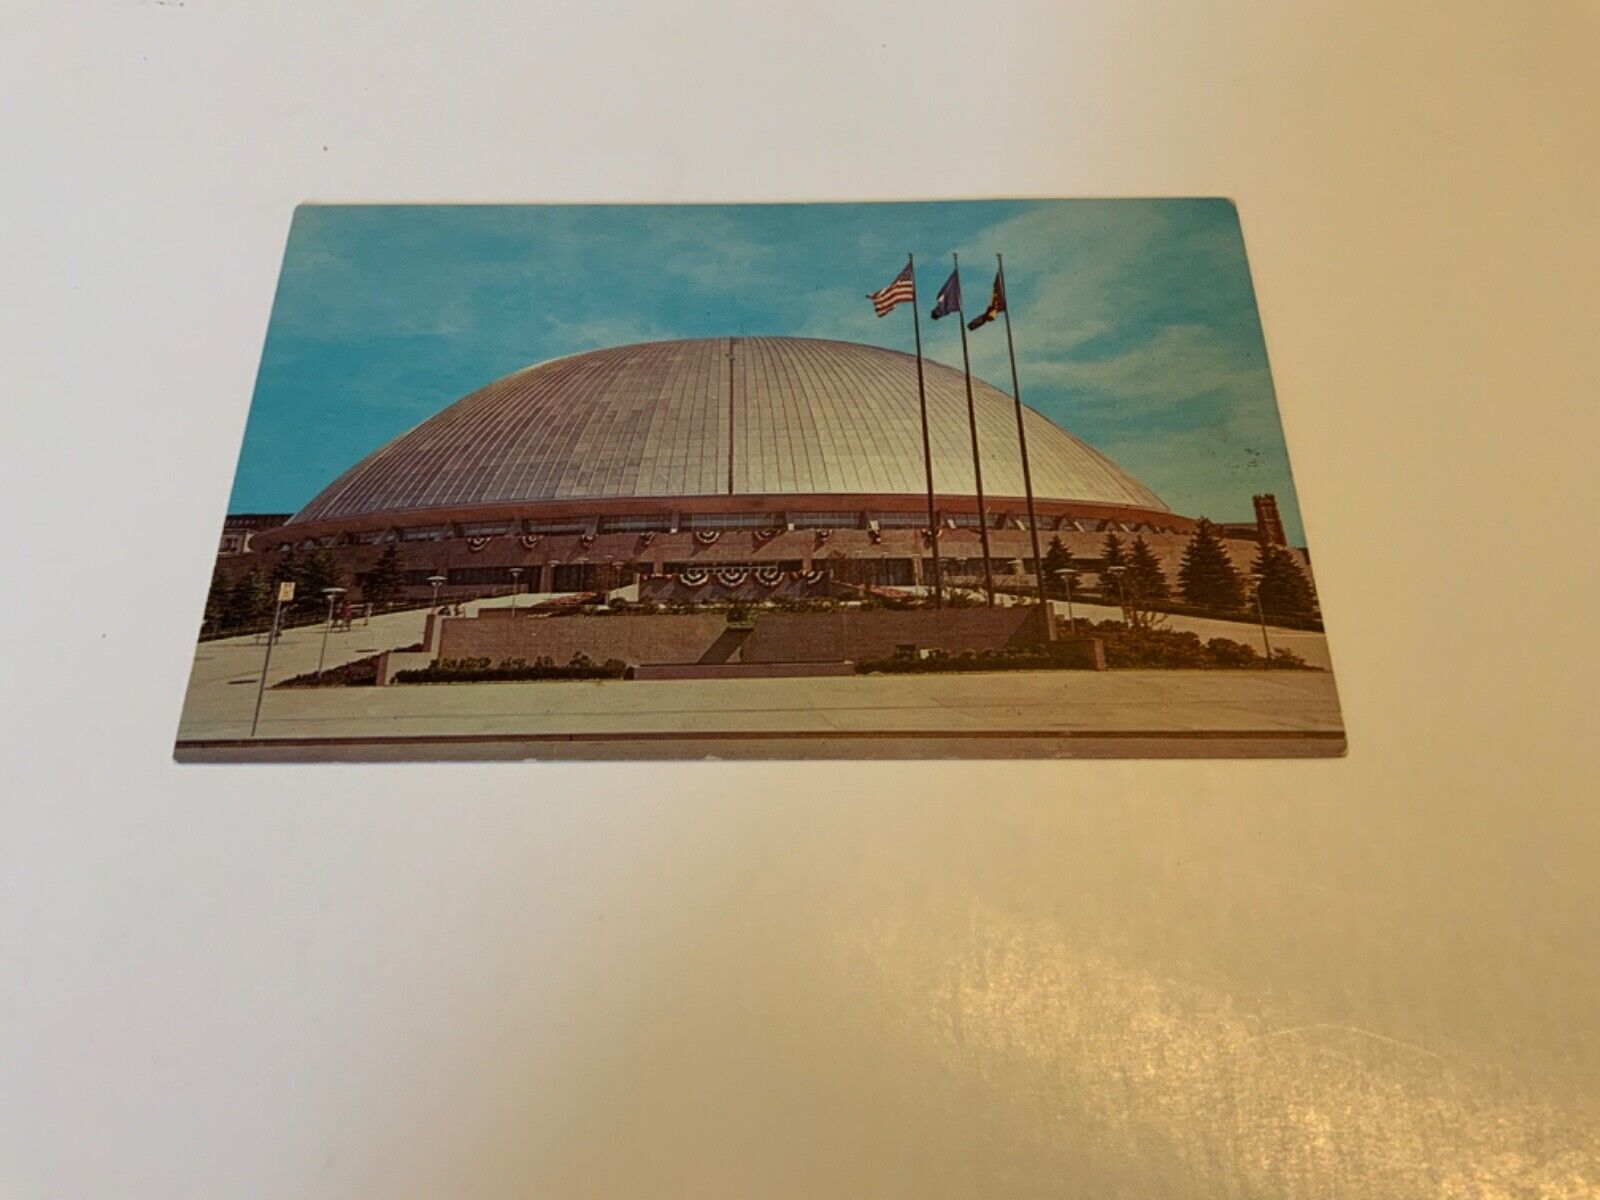 Pittsburgh, Pa. ~ Public Auditorium - Stainless Steel Roof -  Vintage Postcard